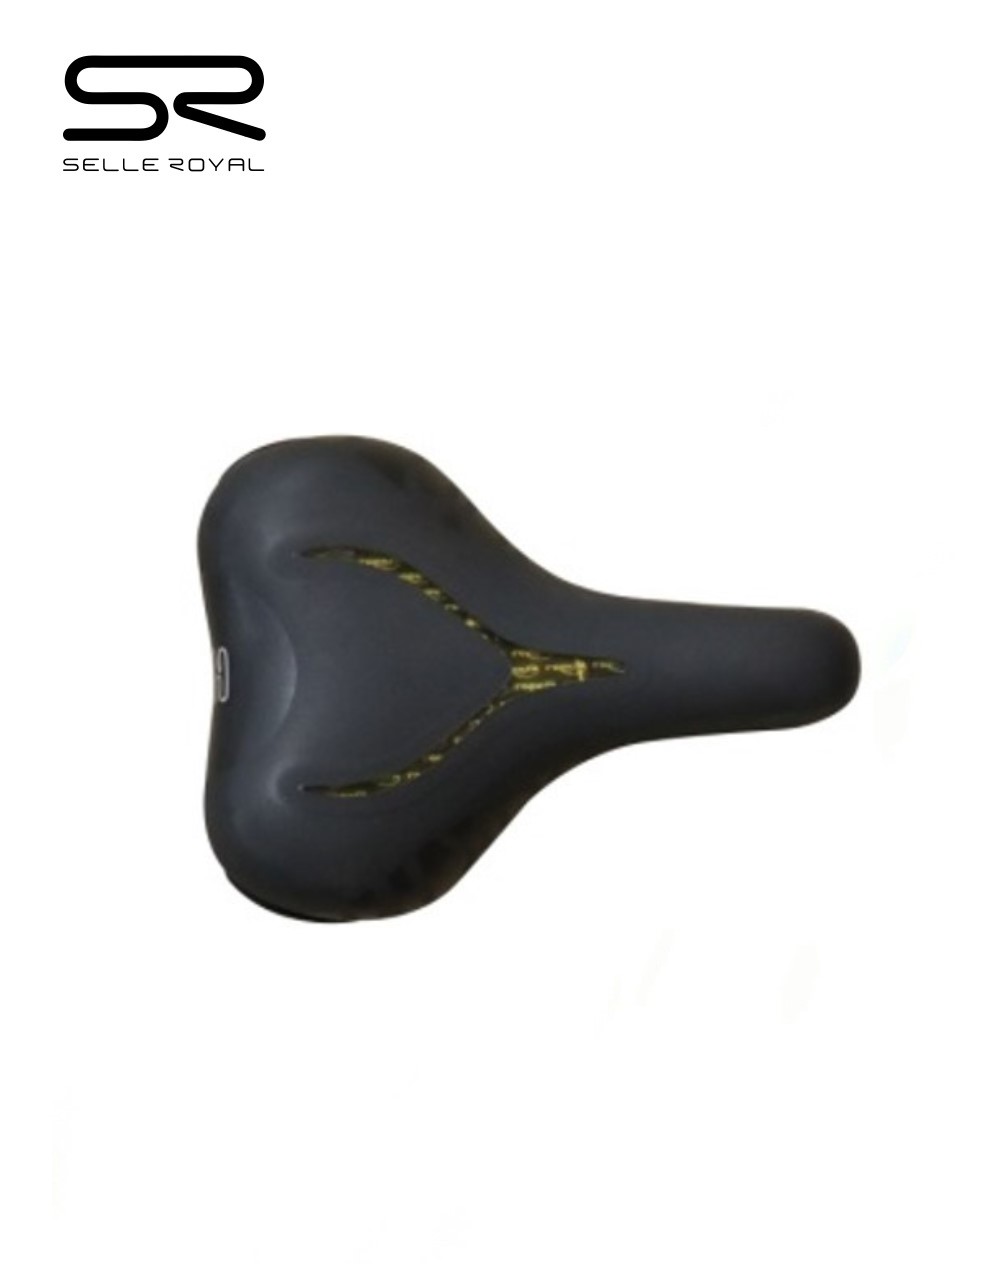 SELLE ROYAL | Buy Online Bike Saddle | Bicycle Saddle Accessories Shop |  Buy Cycle Saddles in